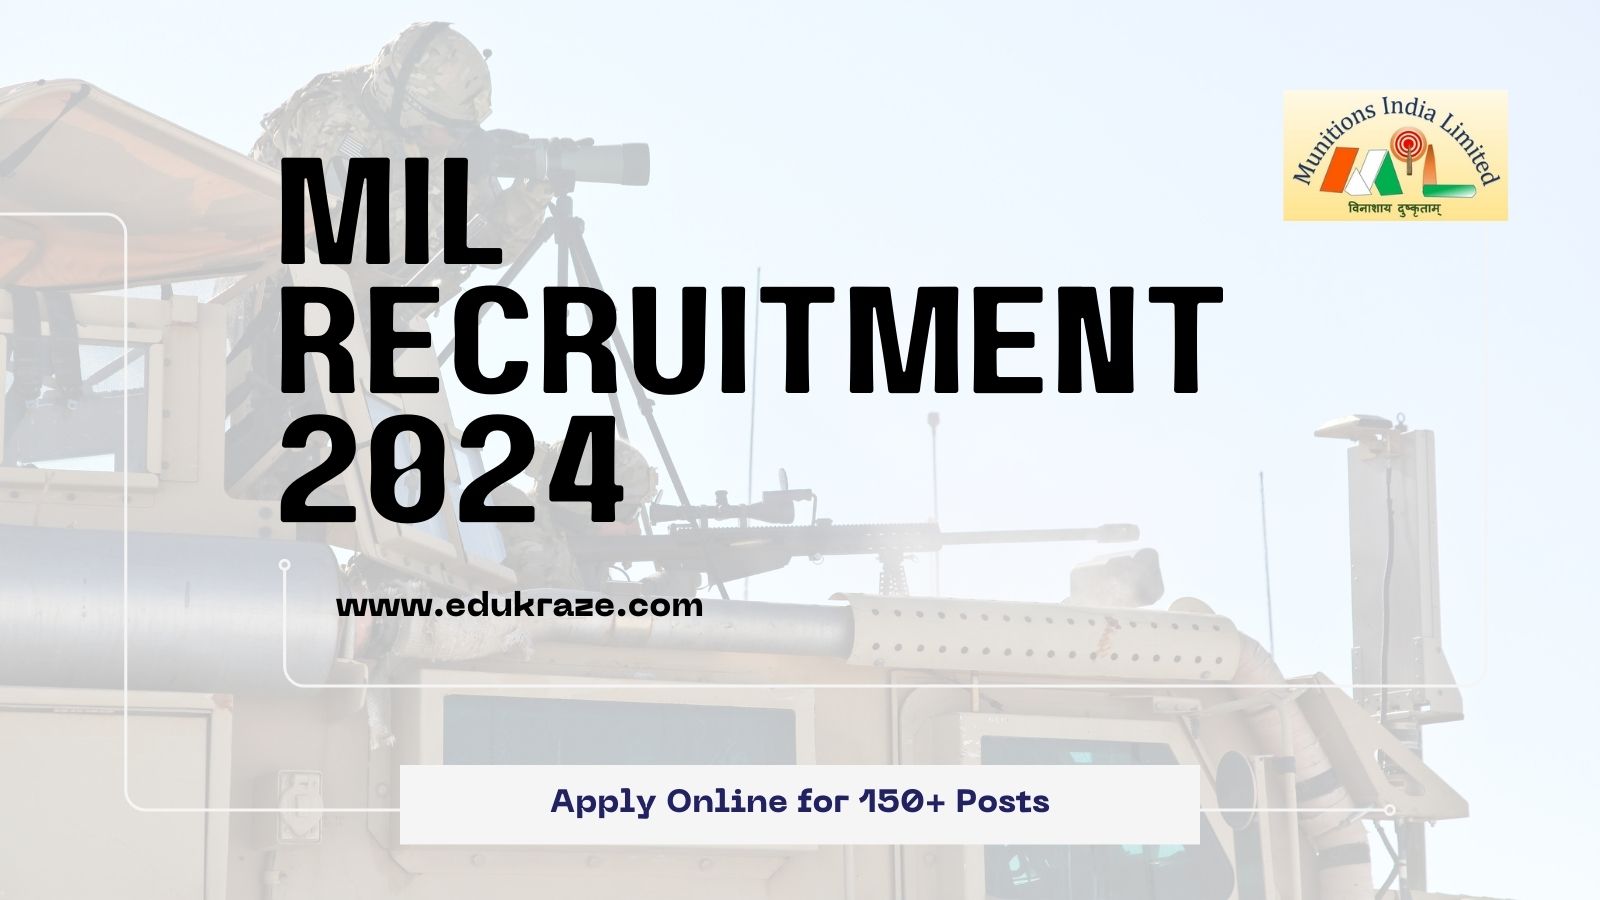 Munitions India Limited Recruitment Out for 2024, Apply online for 150+ Vacancies!